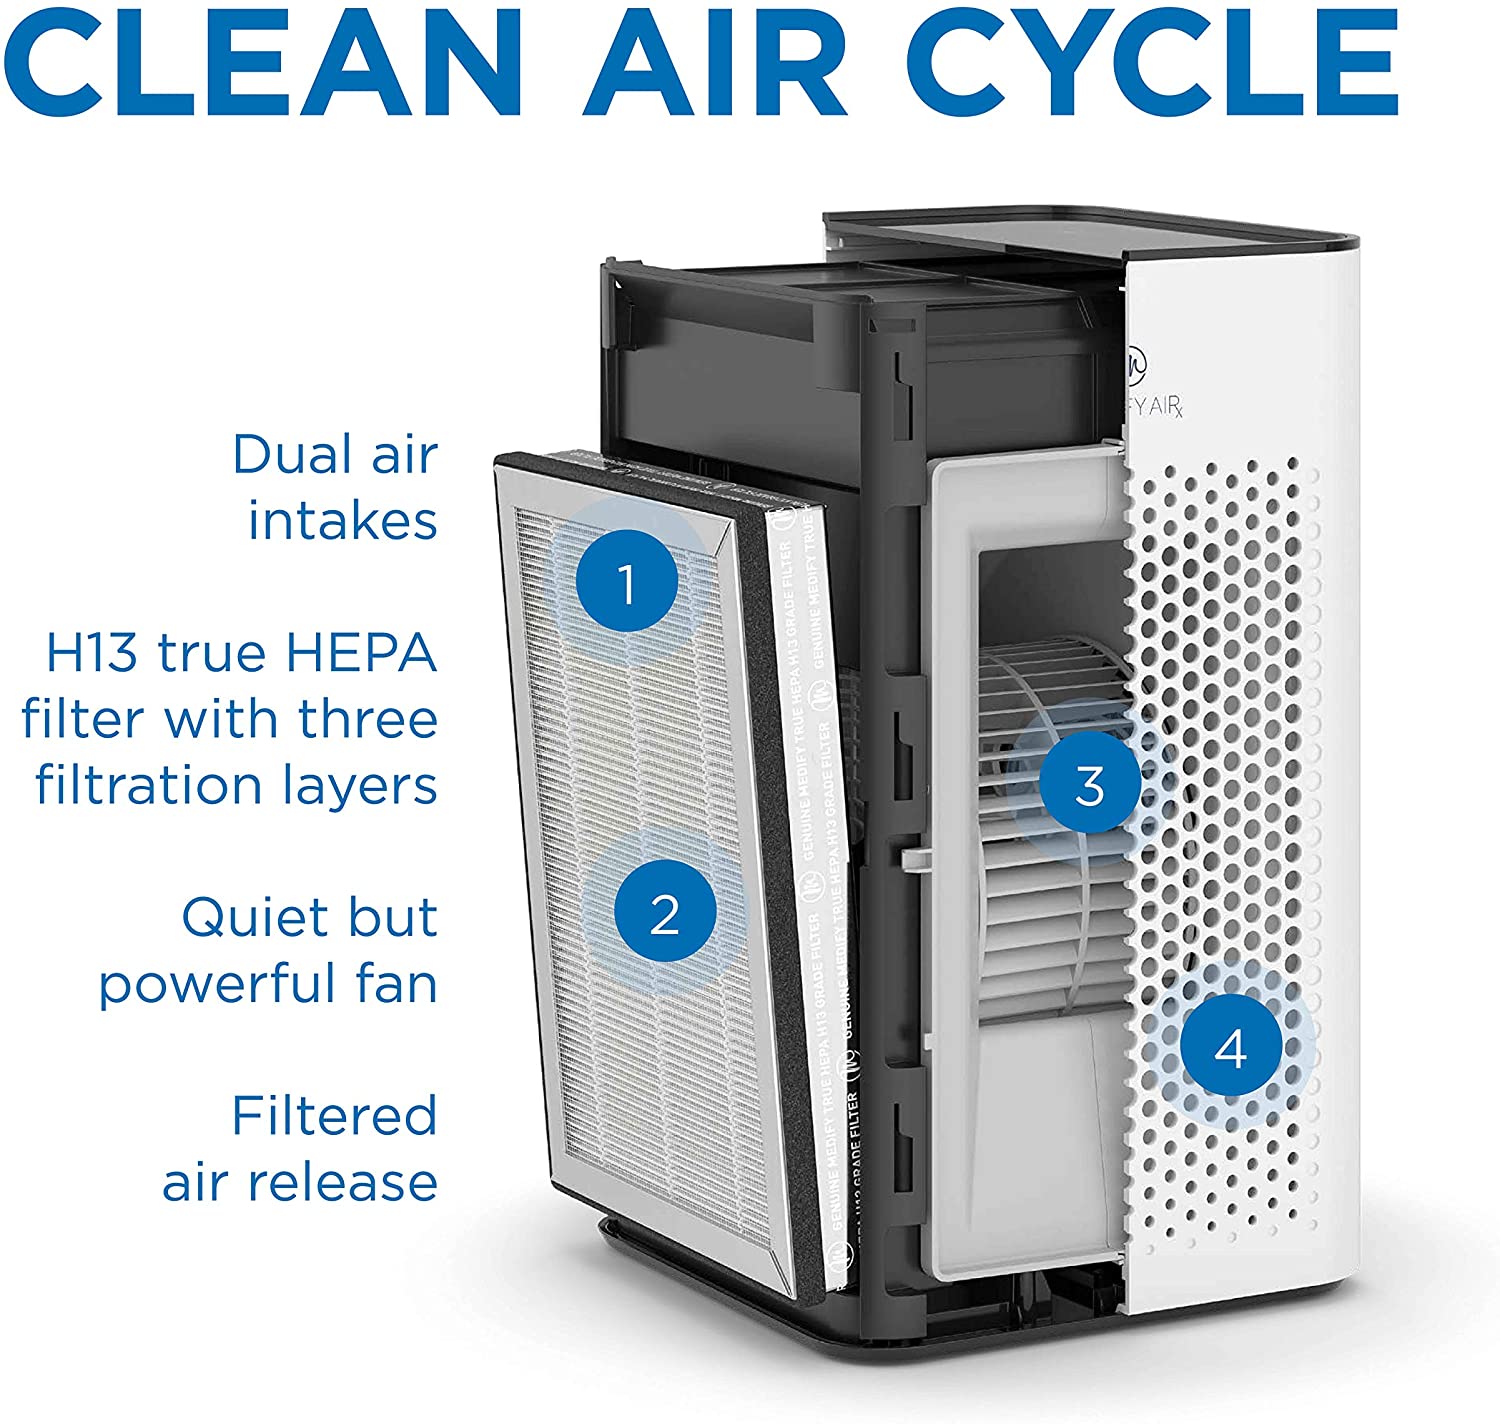 The Medify MA-25 Air Purifier is a powerful desktop-grade purifier with dual air filtration. Perfect for apartments, residential rooms